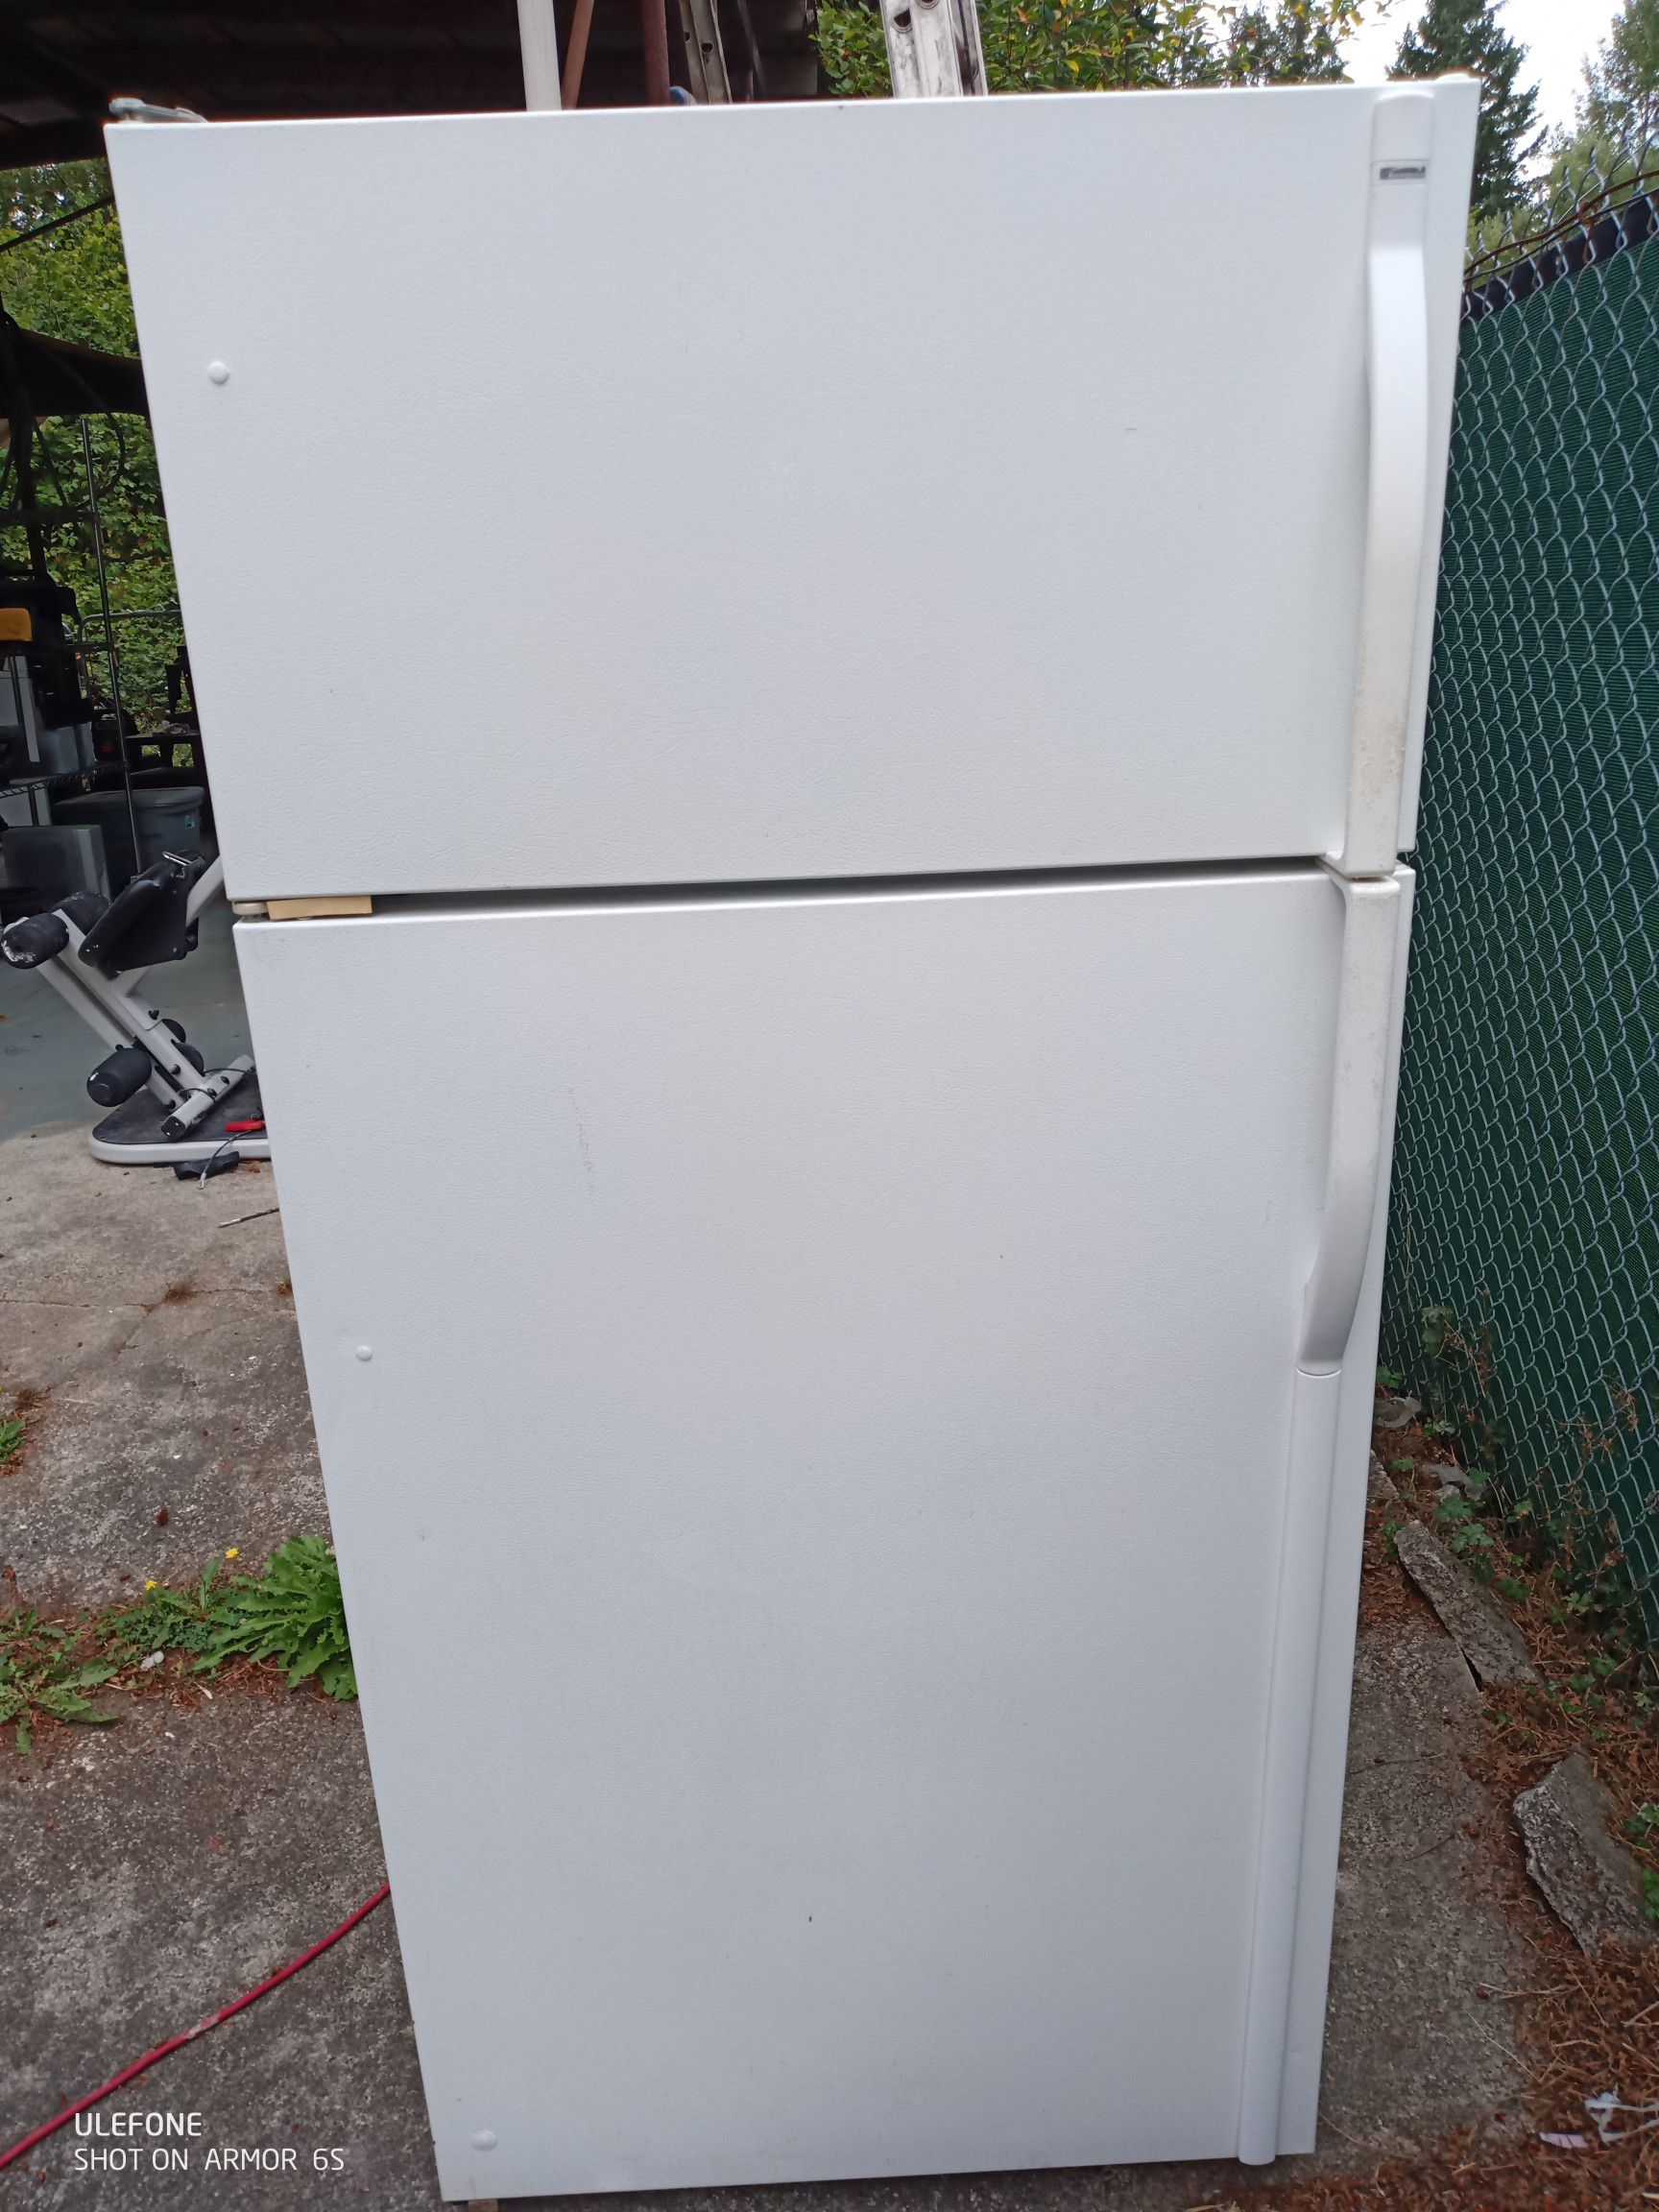 Working fridge and freezer with ice maker